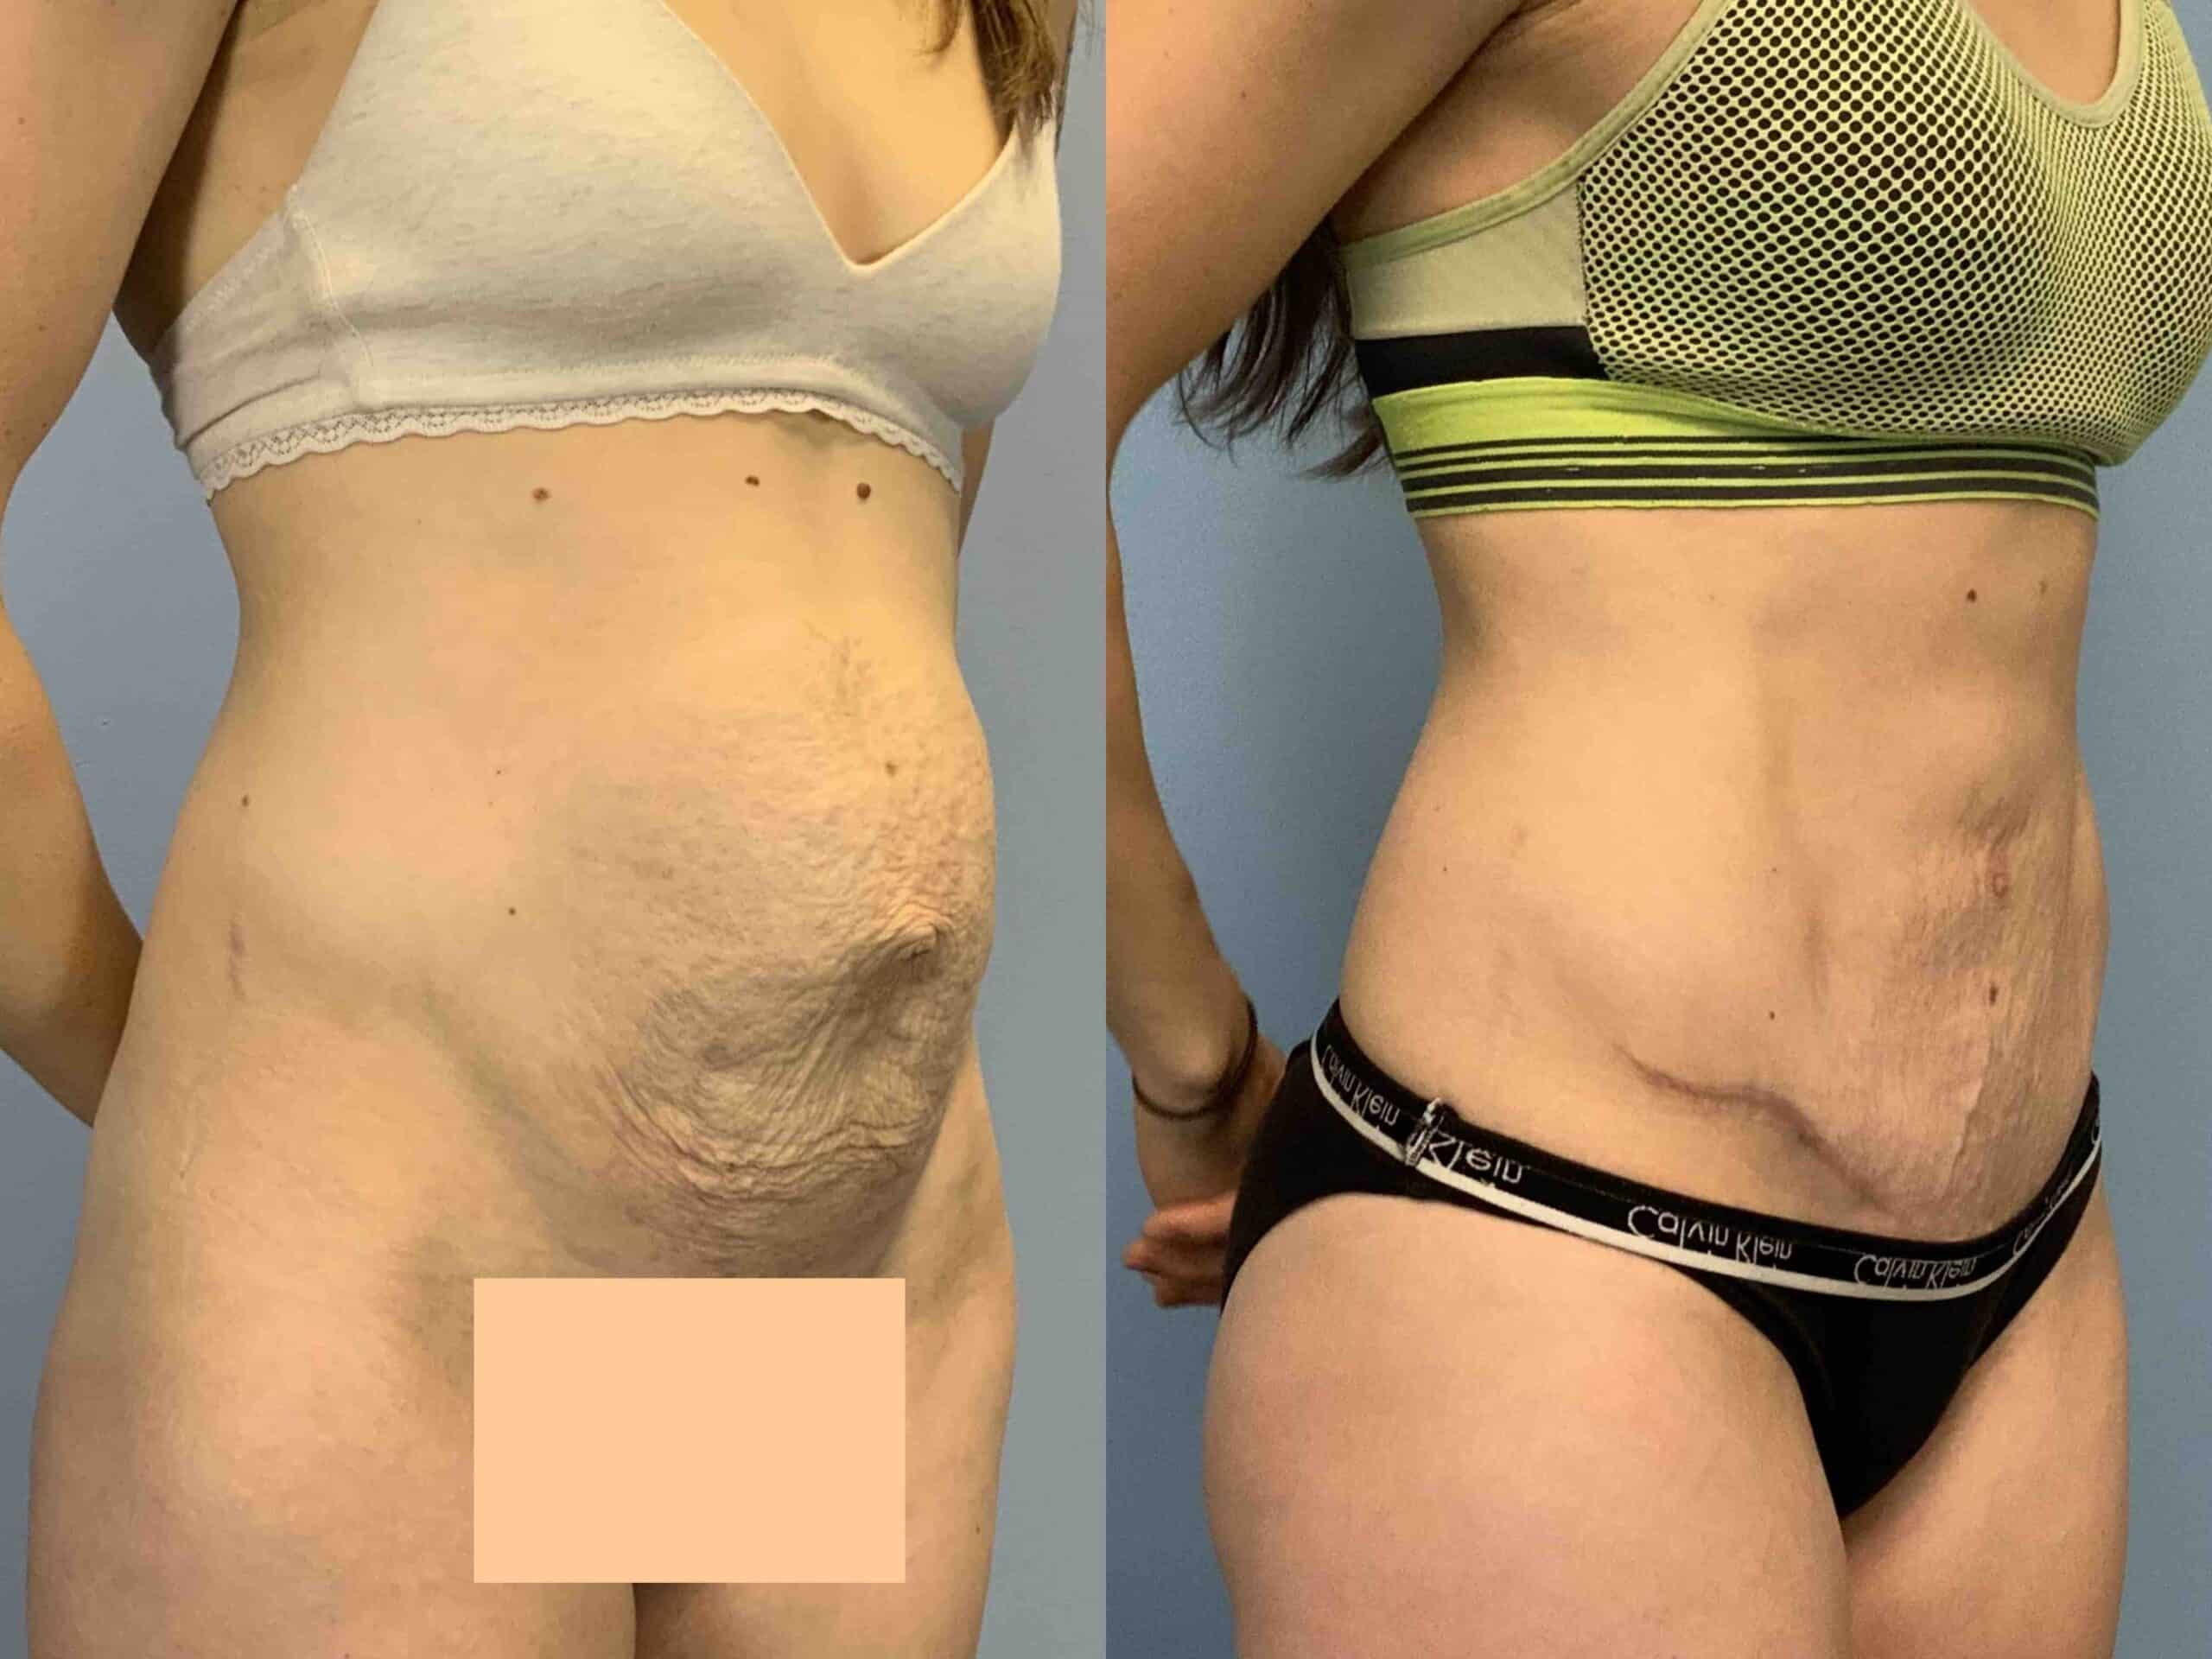 Before and after, 6 mo post op from Abdominoplasty, Hernia Repair Surgery performed by Dr. Paul Vanek (diagonal view)